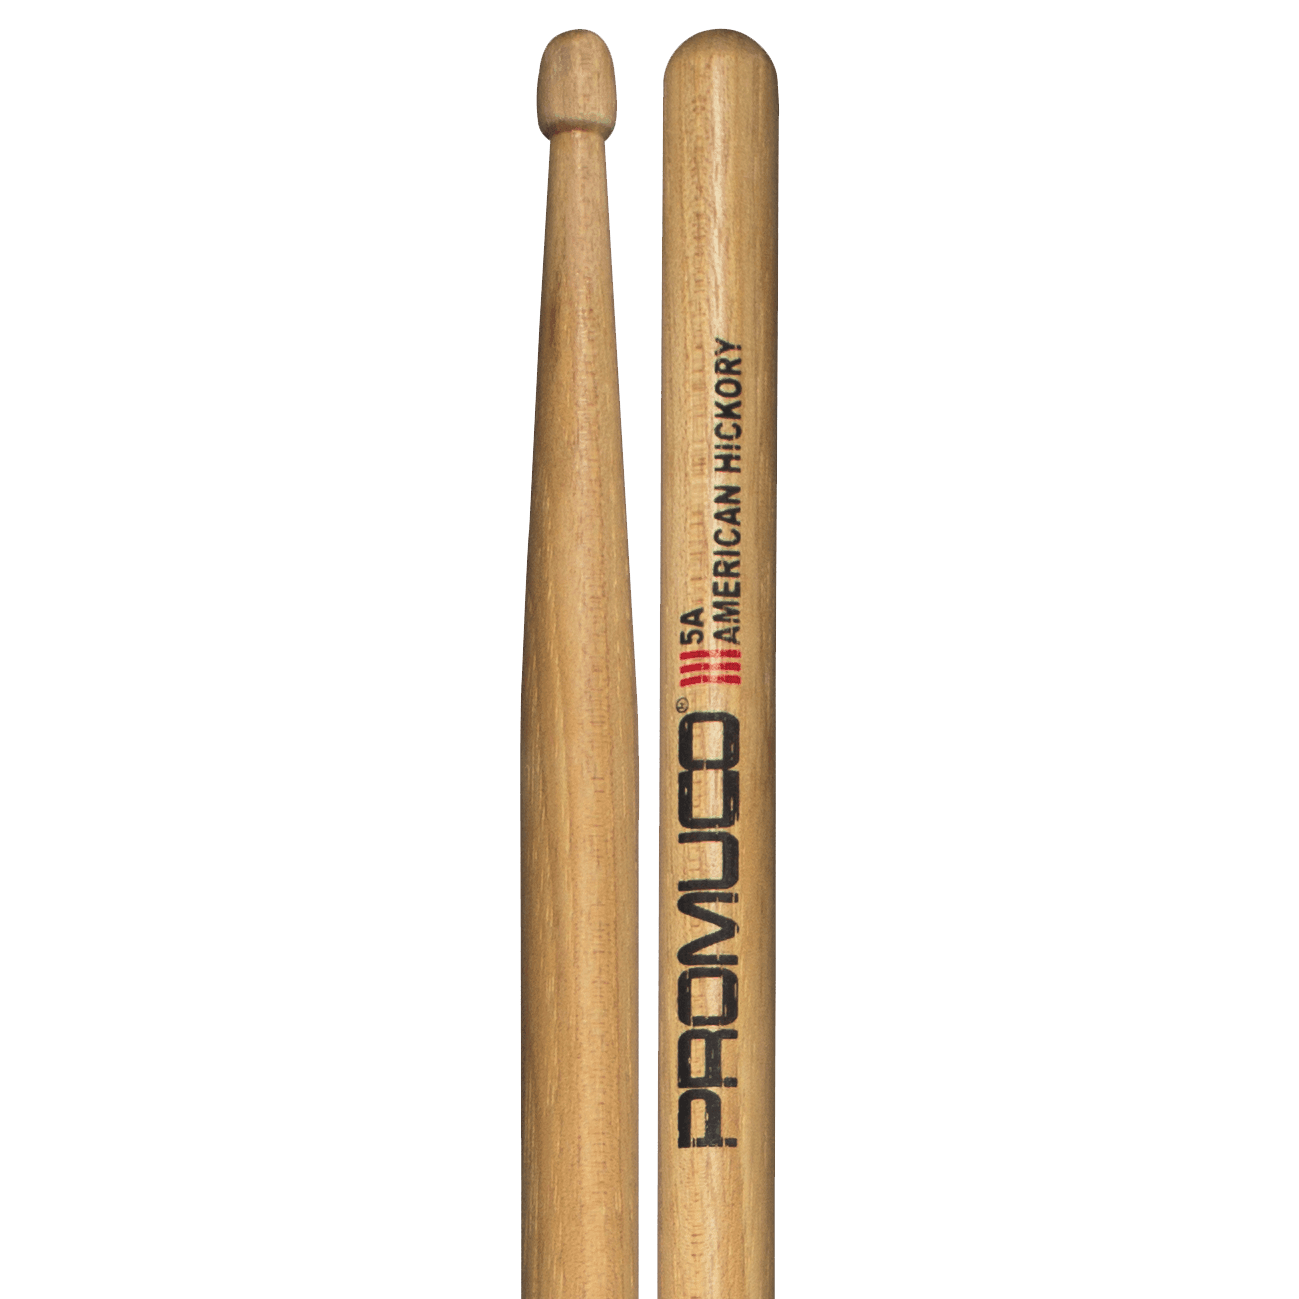 Promuco 5A American Hickory Woodtip Drumsticks - Drums & Percussion - Sticks & Mallets by Promuco at Muso's Stuff